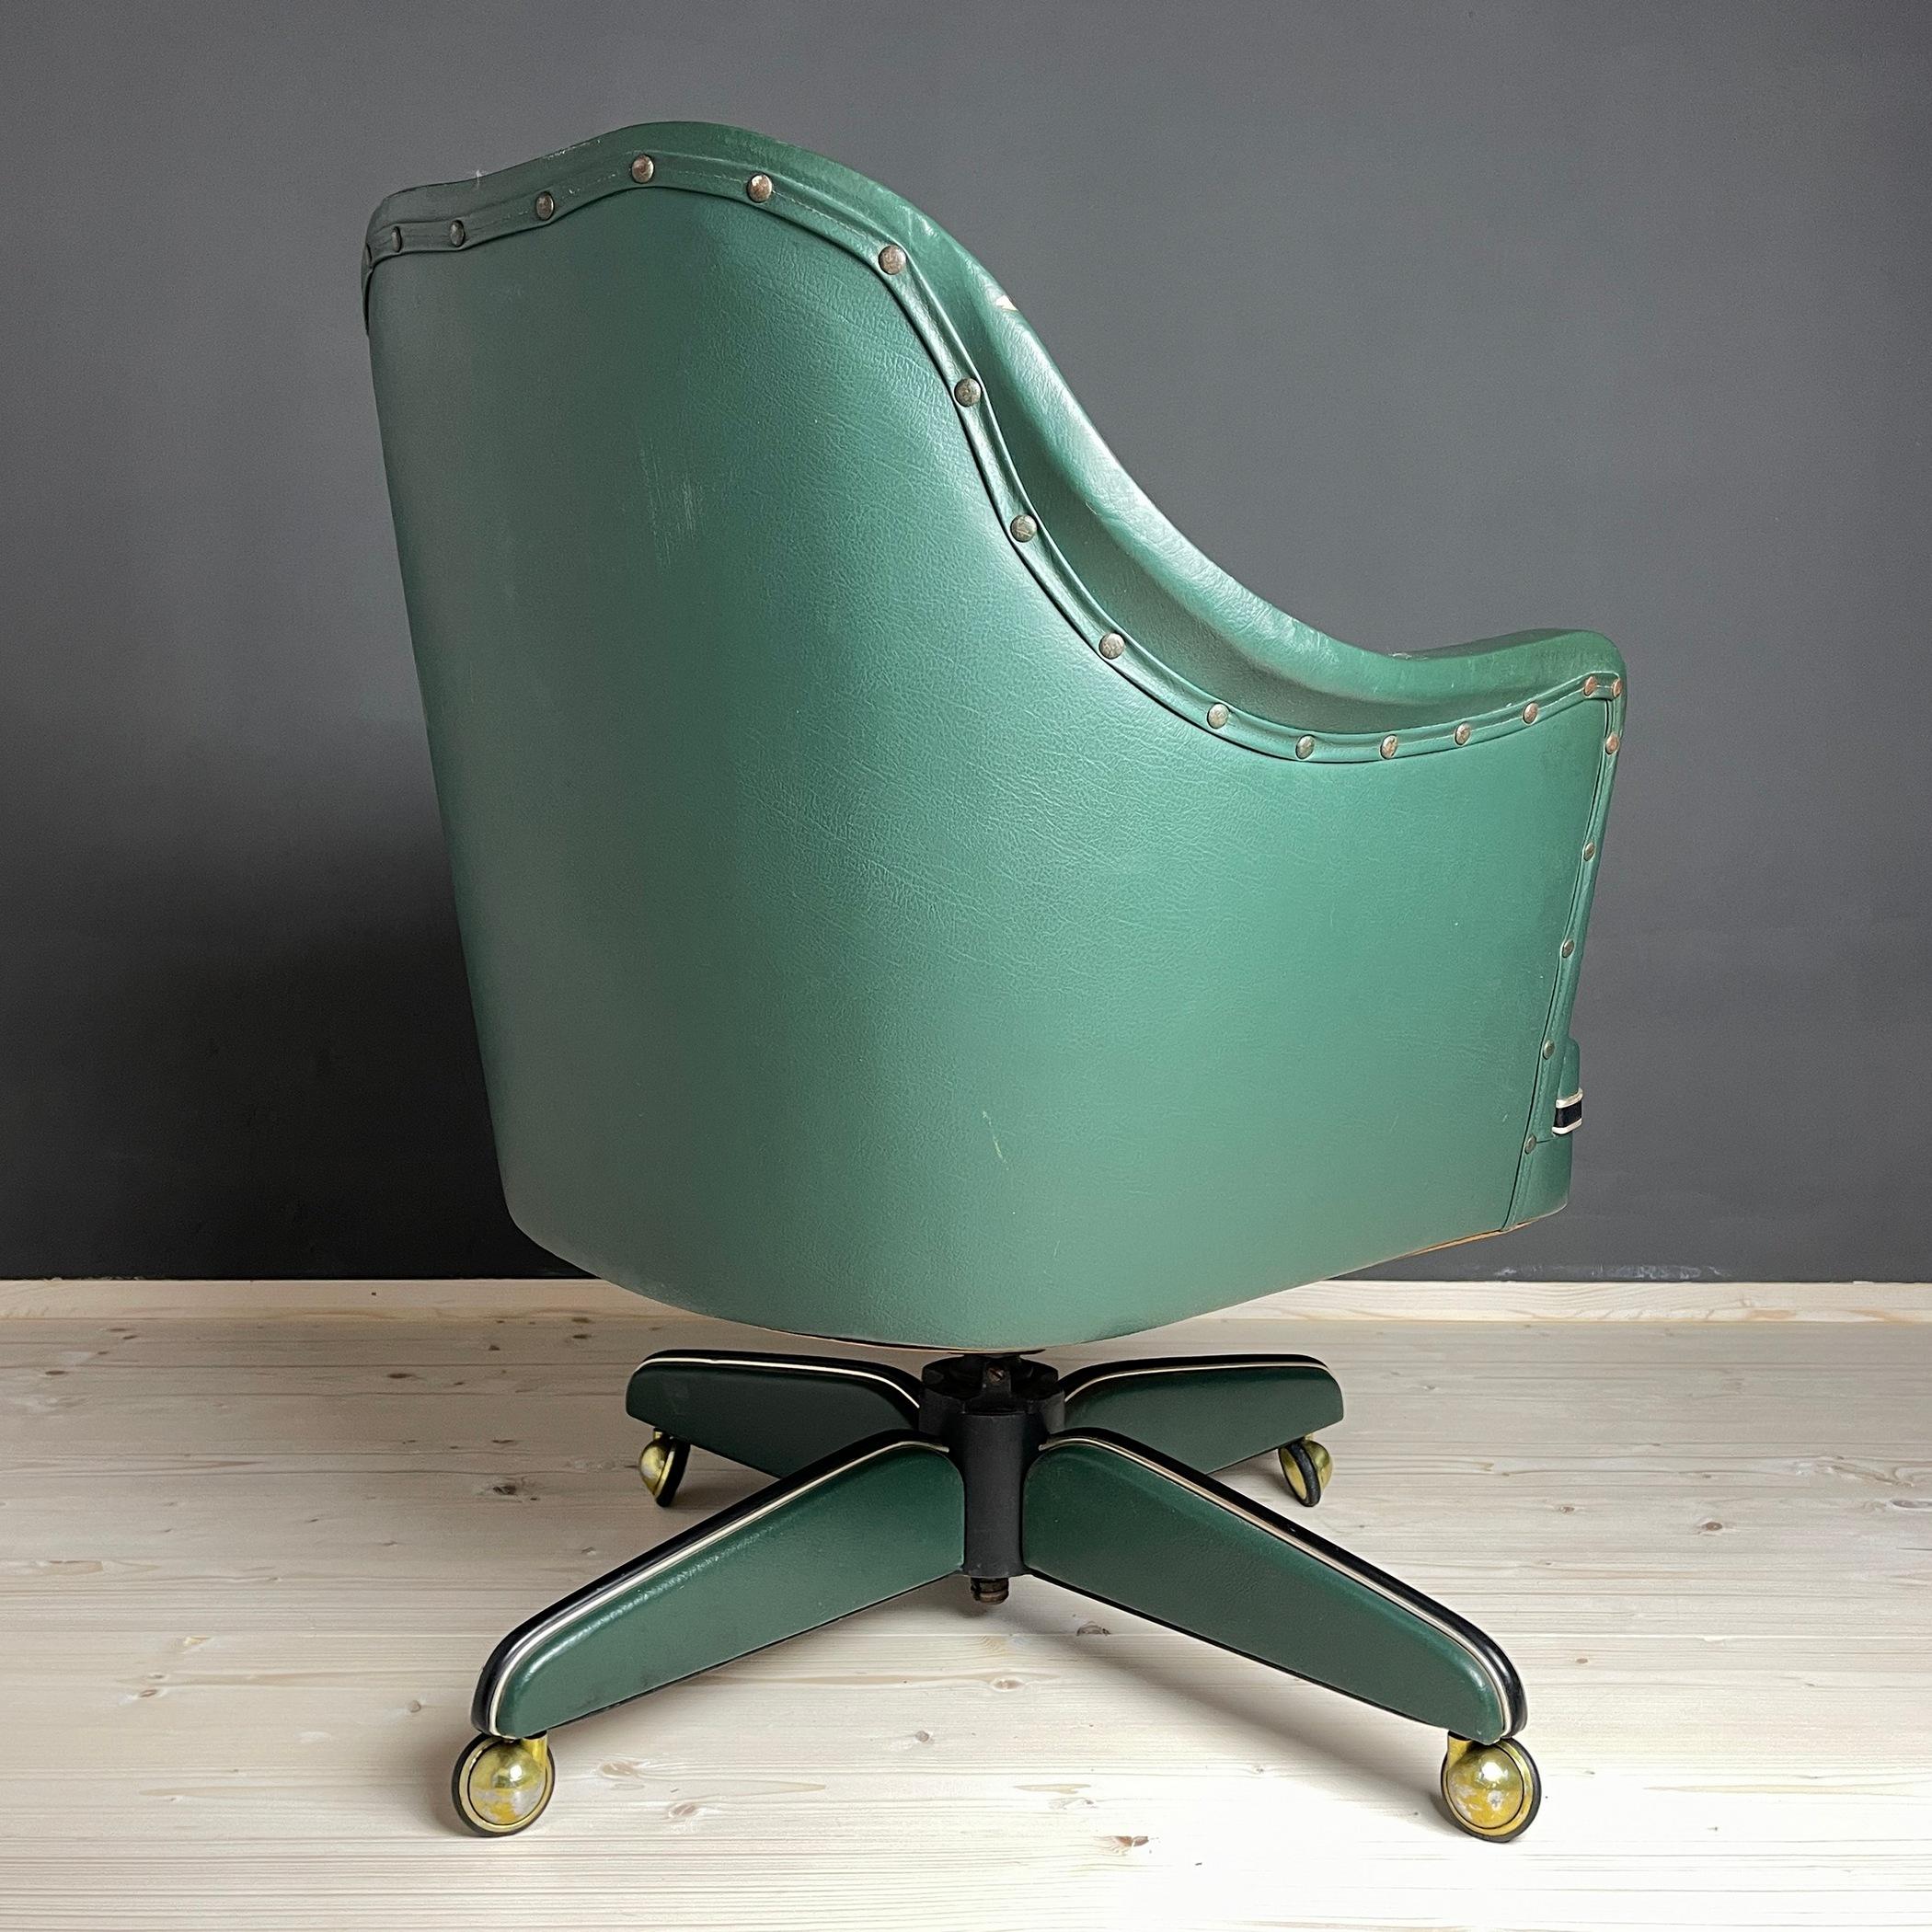 Italian Mid-Century Swivel Green Office Chair by Umberto Mascagni, Italy, 1950s For Sale